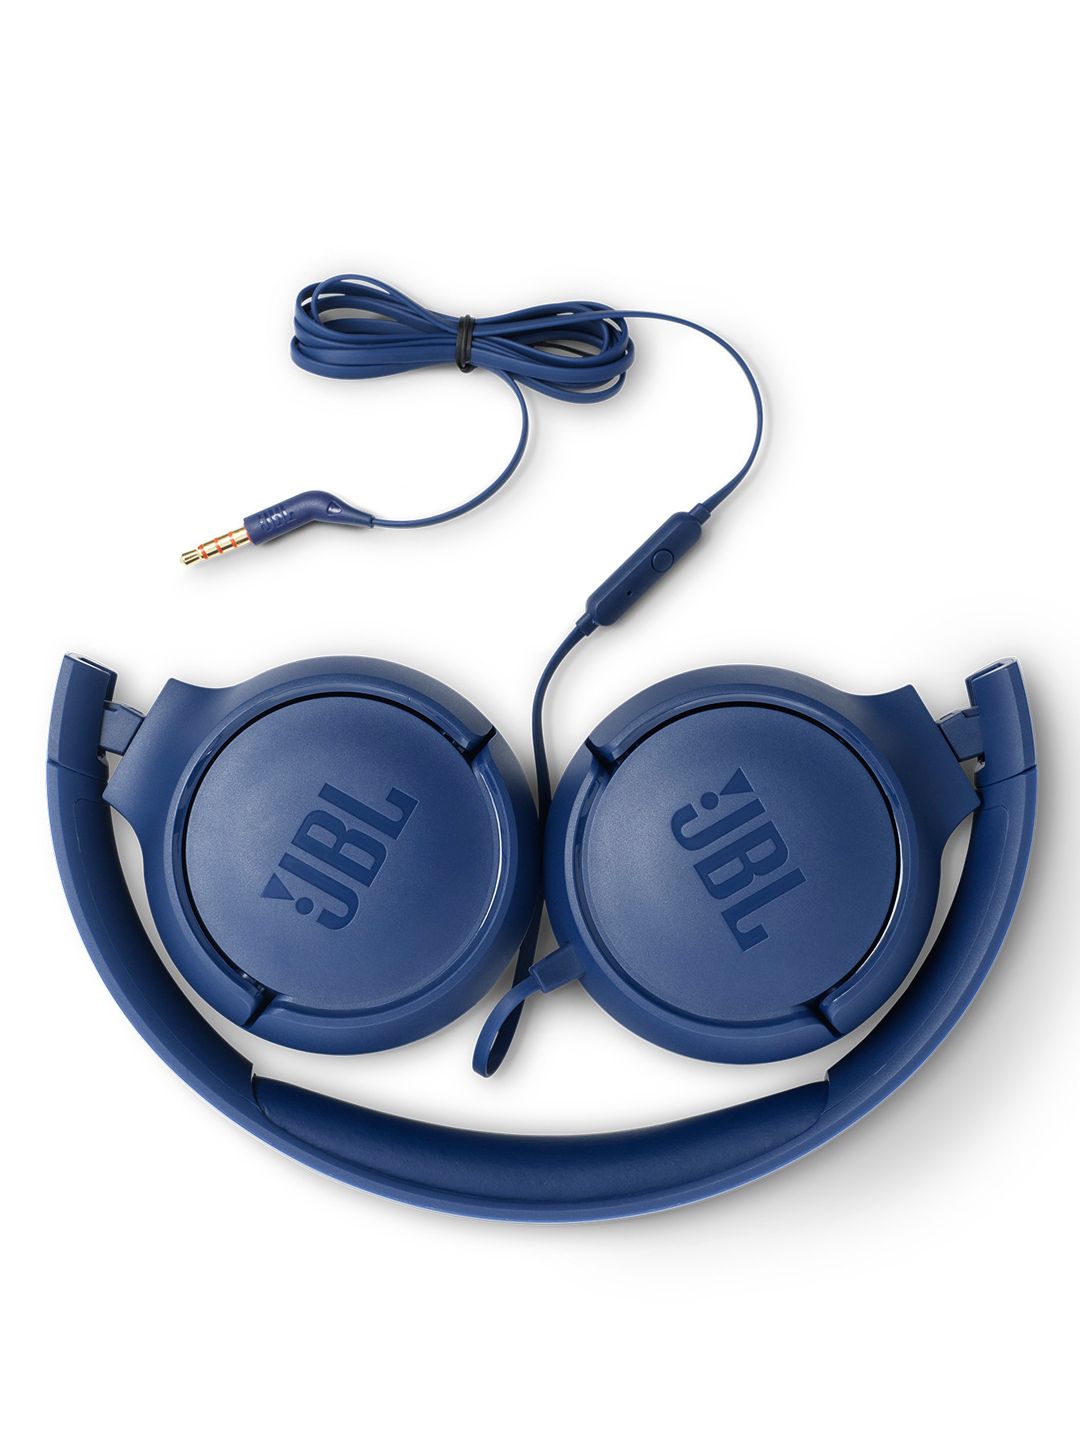 JBL Blue T500 Powerful Bass On-Ear Headphones with Mic Price in India